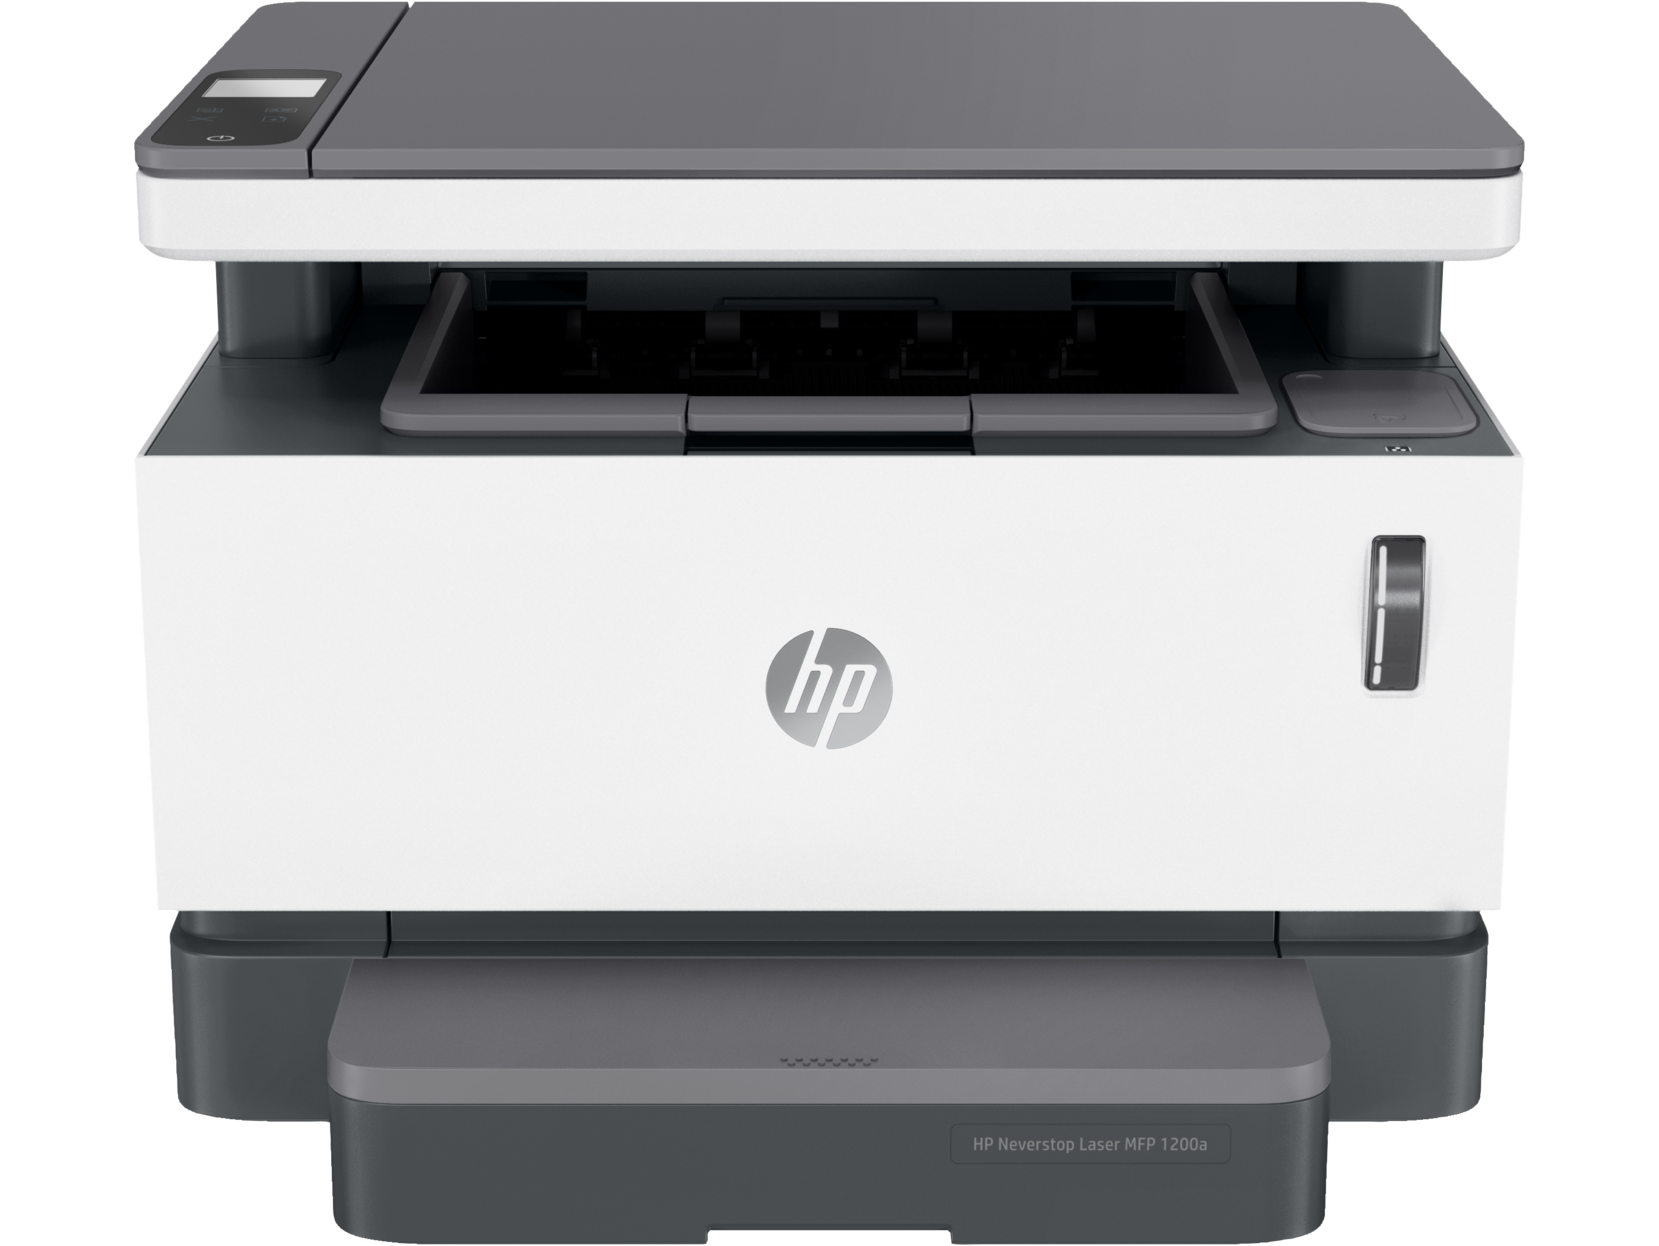 Nạp mực máy in HP Neverstop Laser MFP 1200A